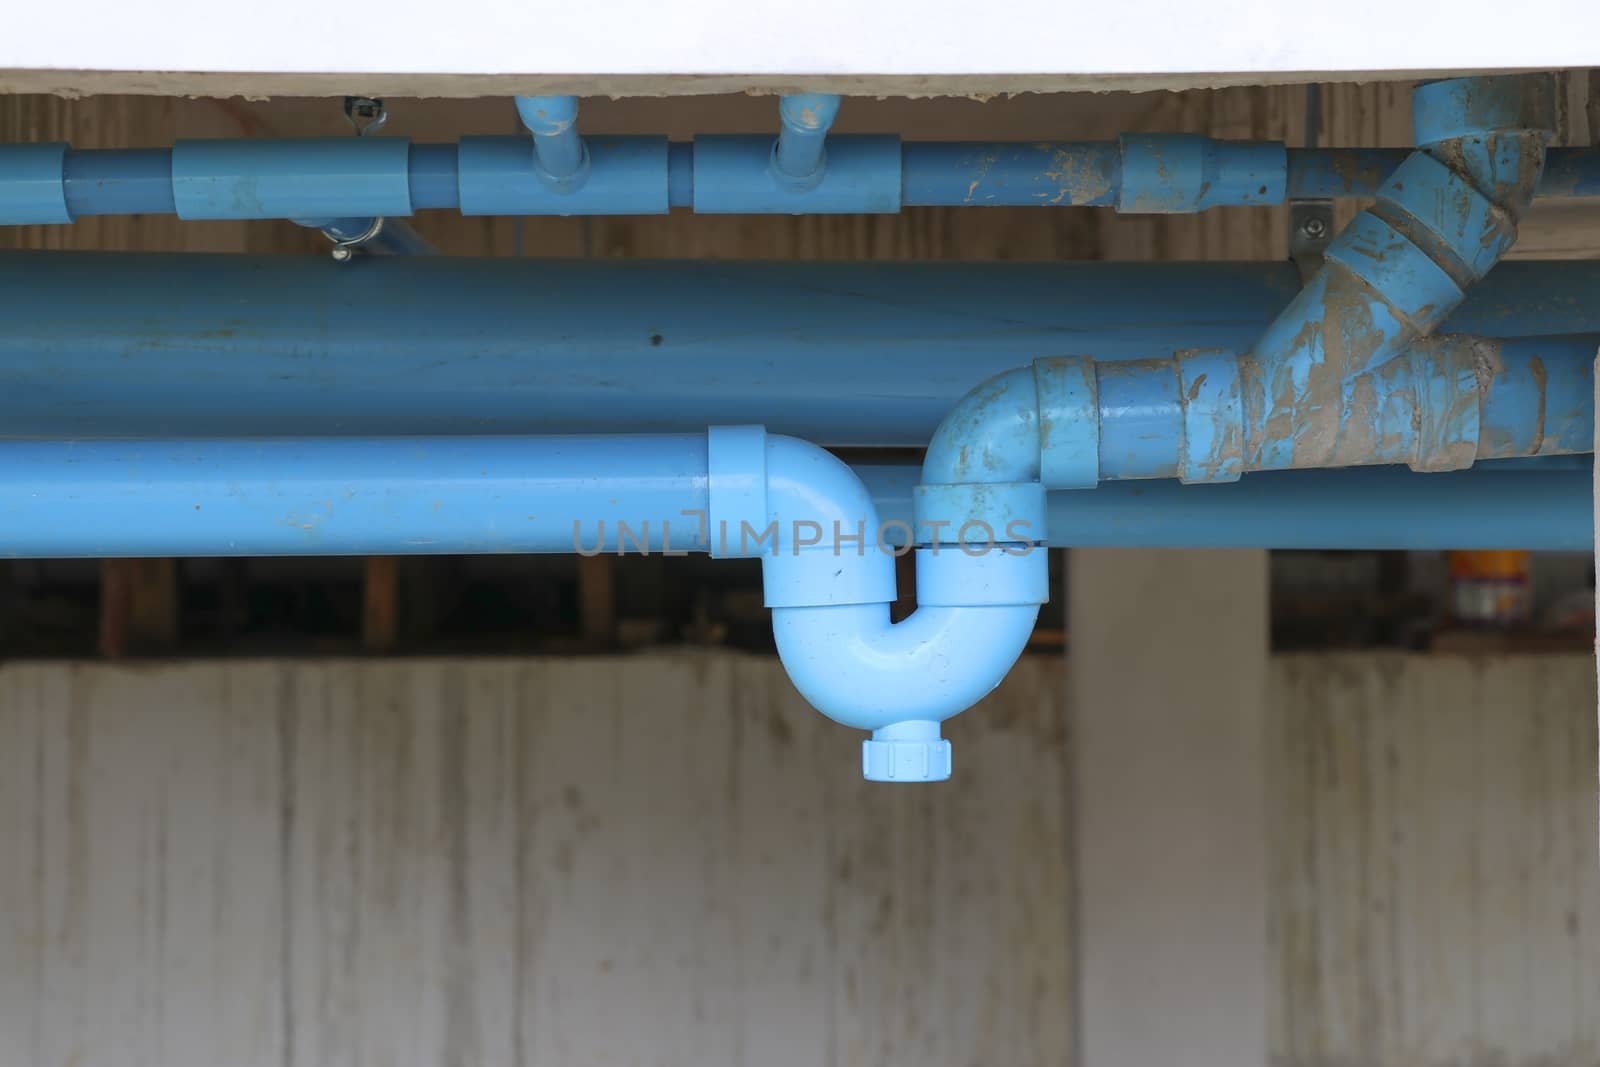 Blue P-trap pvc for reverse odor protection. Blue sanitary P-trap installed at site construction.